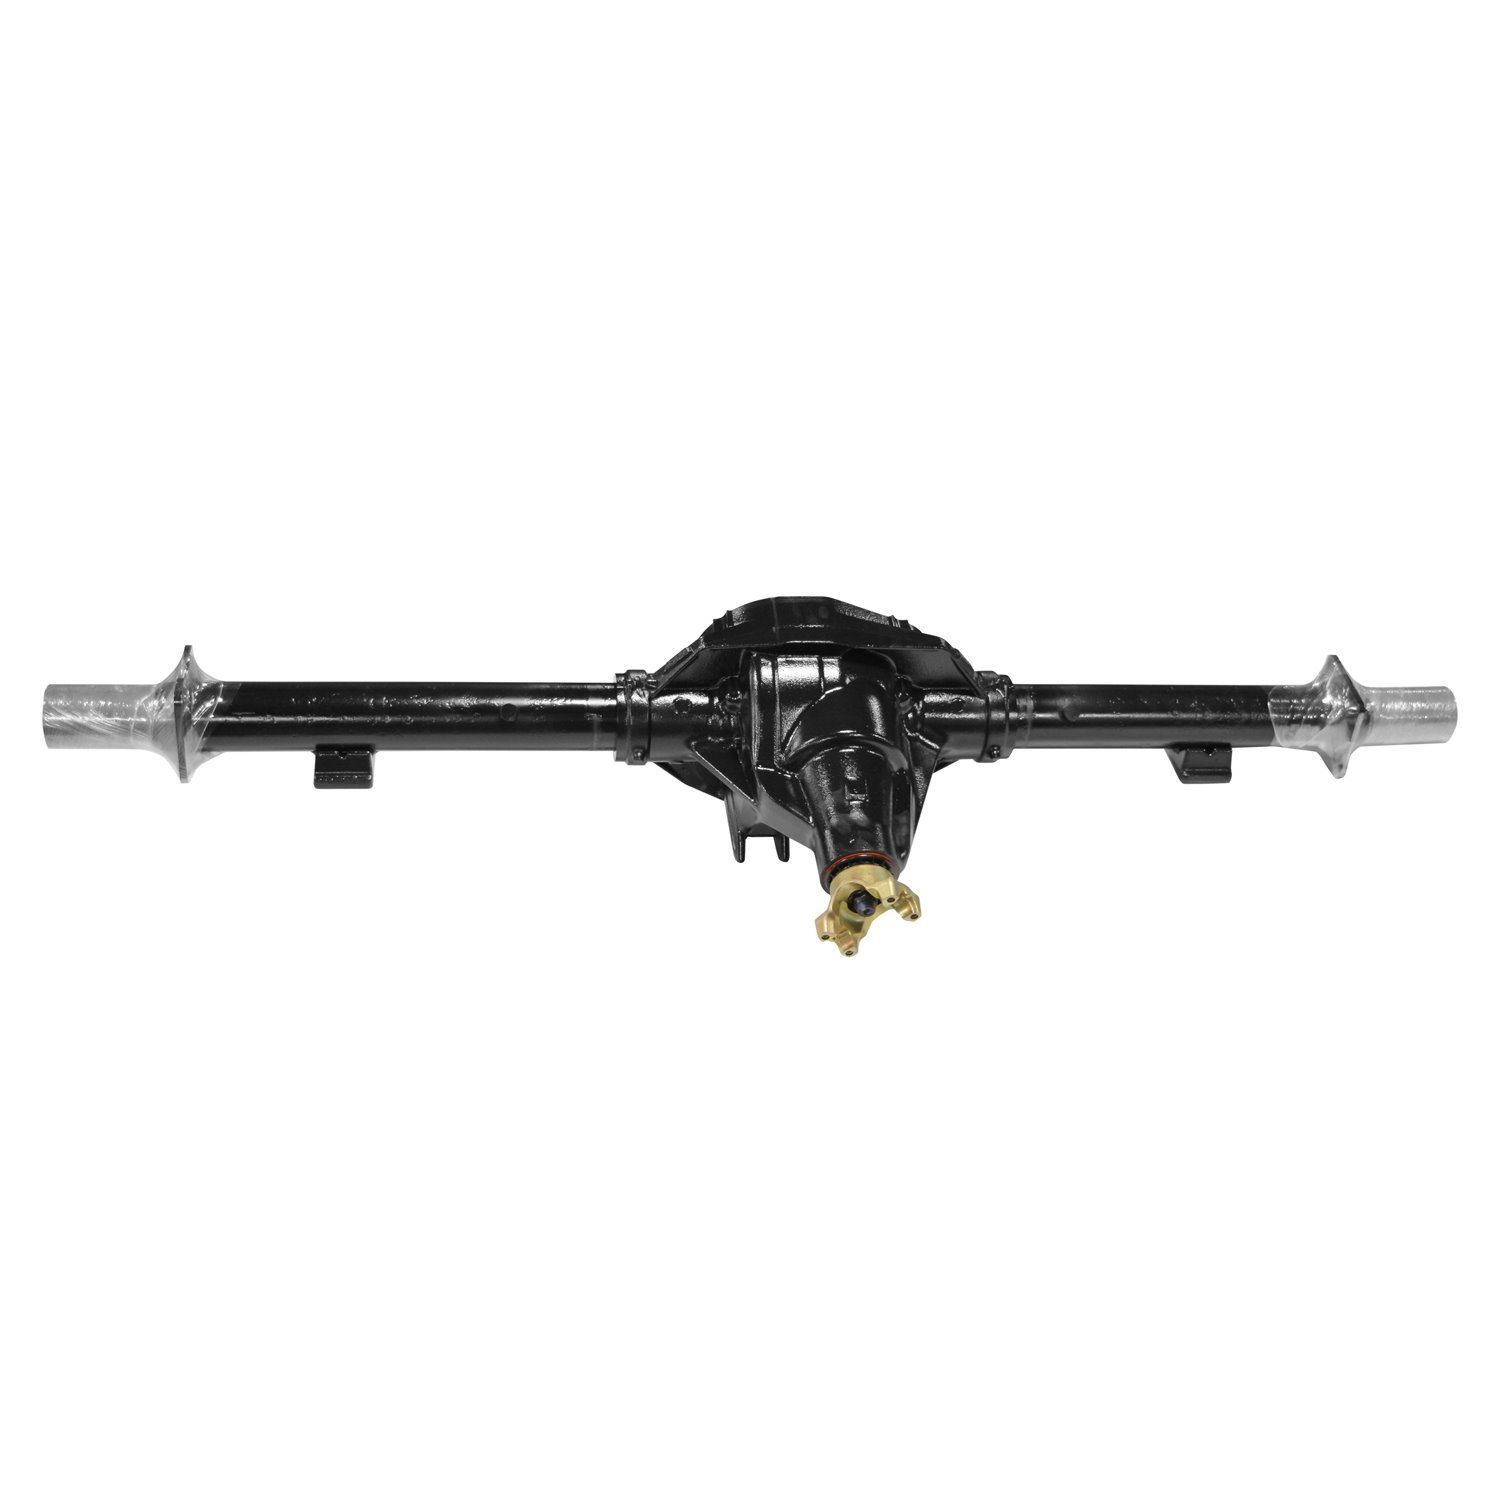 Remanufactured Axle Assembly, 10.5" 00-01 Excursion, F250 & F350 4.10 , SRW, U-Joint Yoke